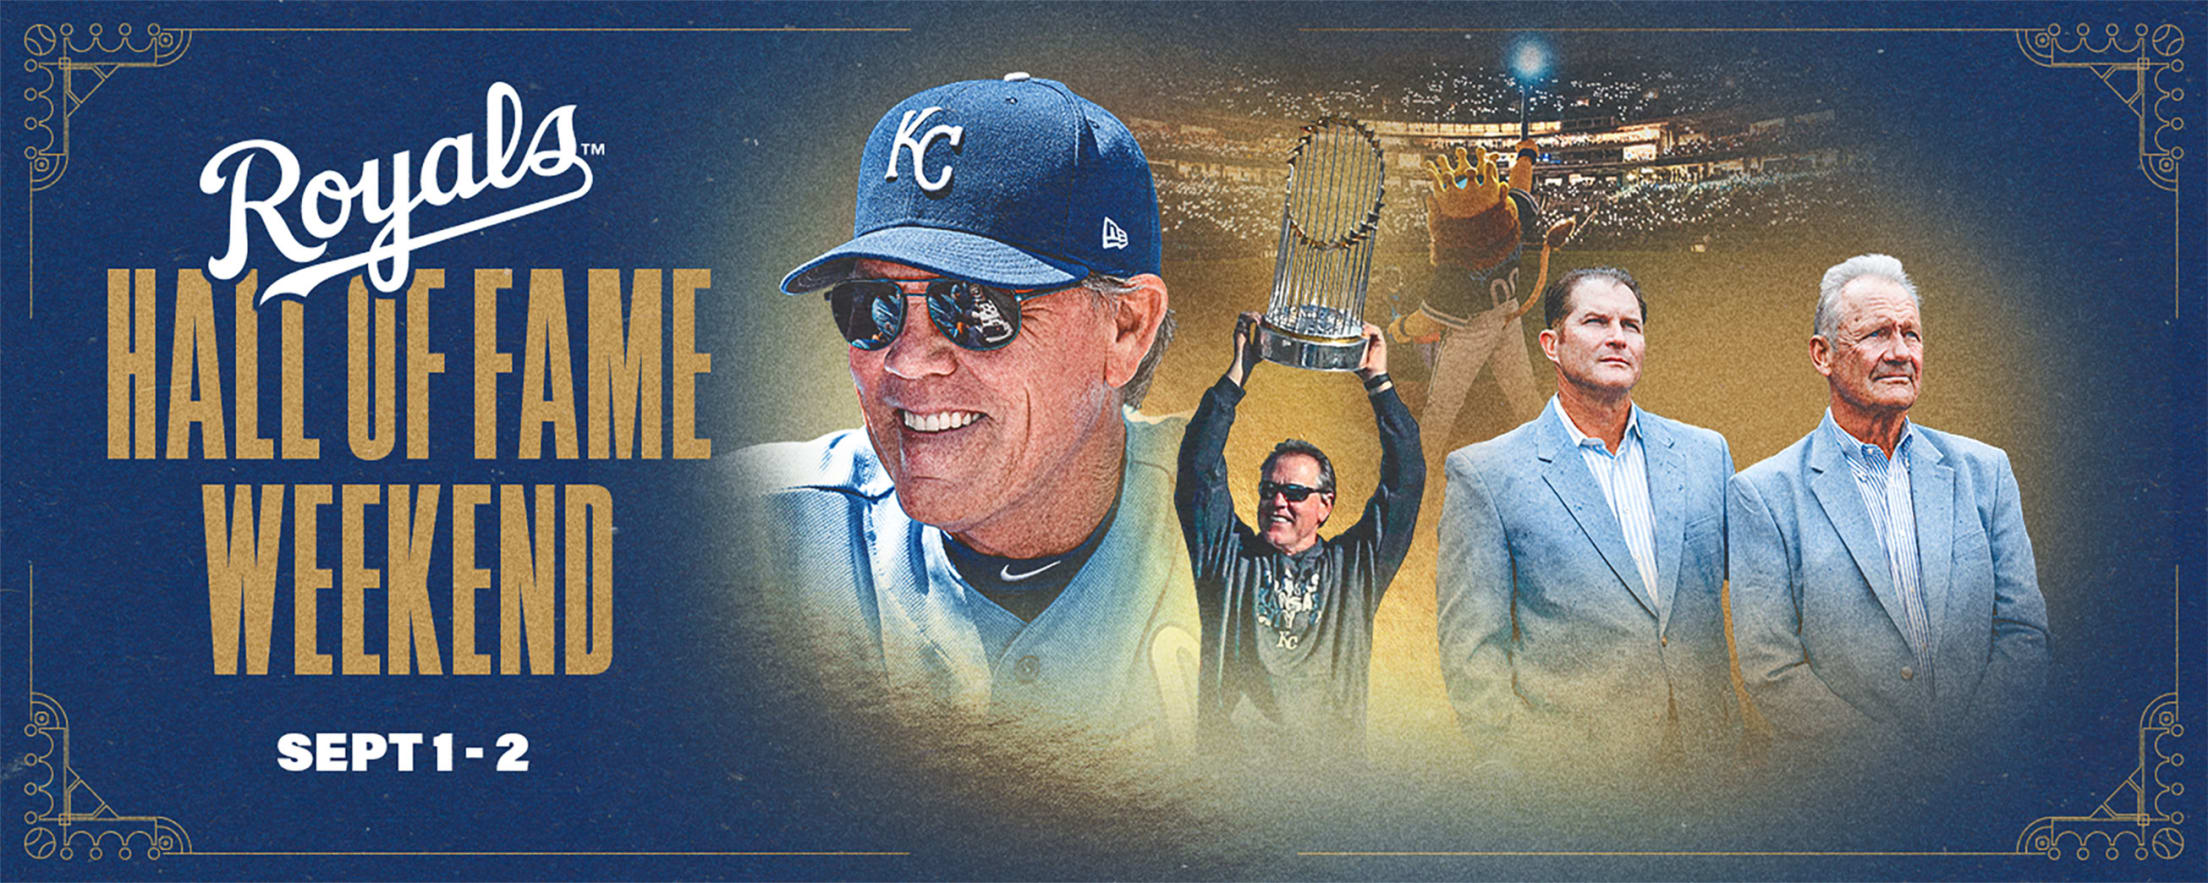 Kansas City Royals Hall of Fame Fan Experience